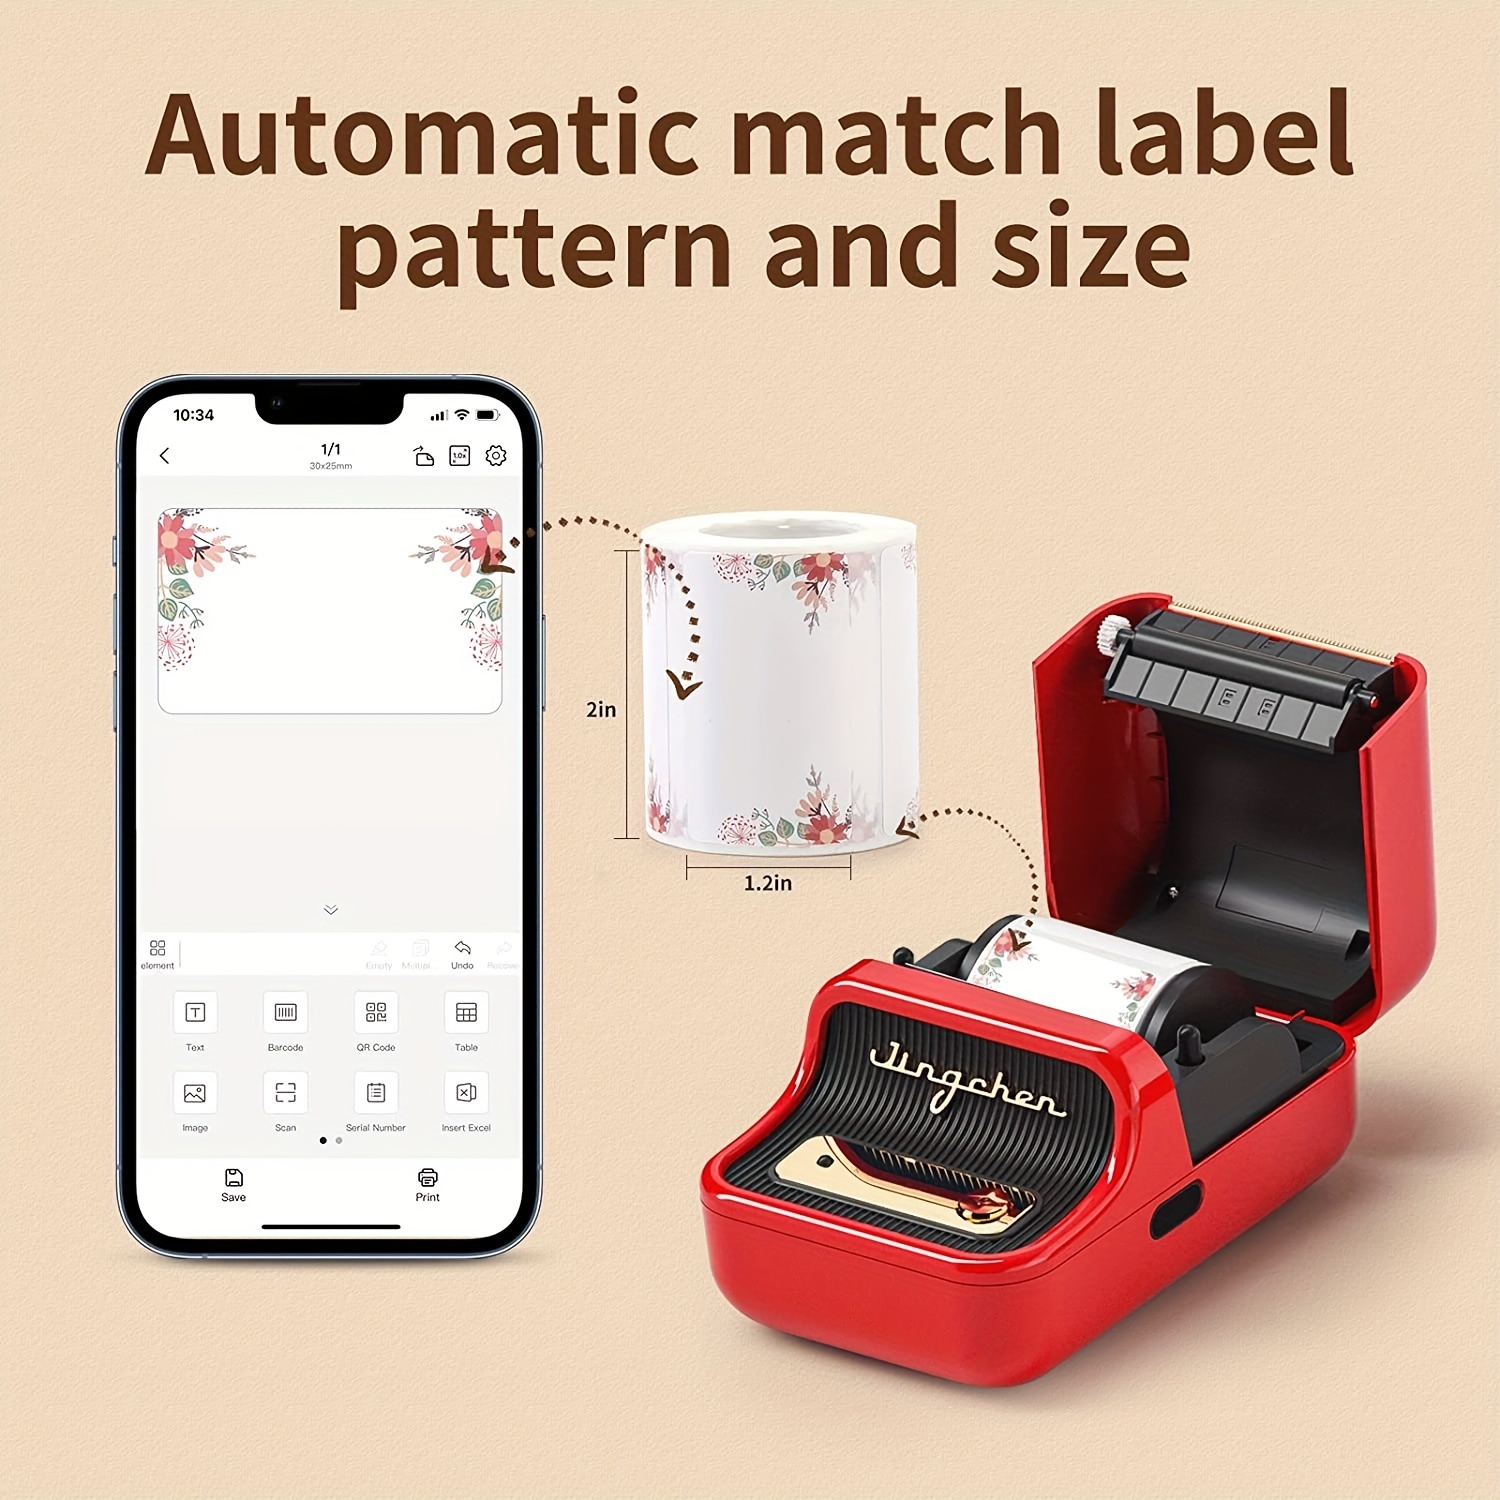 Label Printer Portable Wireless BT Thermal Label Maker Sticker Printer with  RFID Recognition Great for Supermarket Clothing Jewelry Retail Store Home